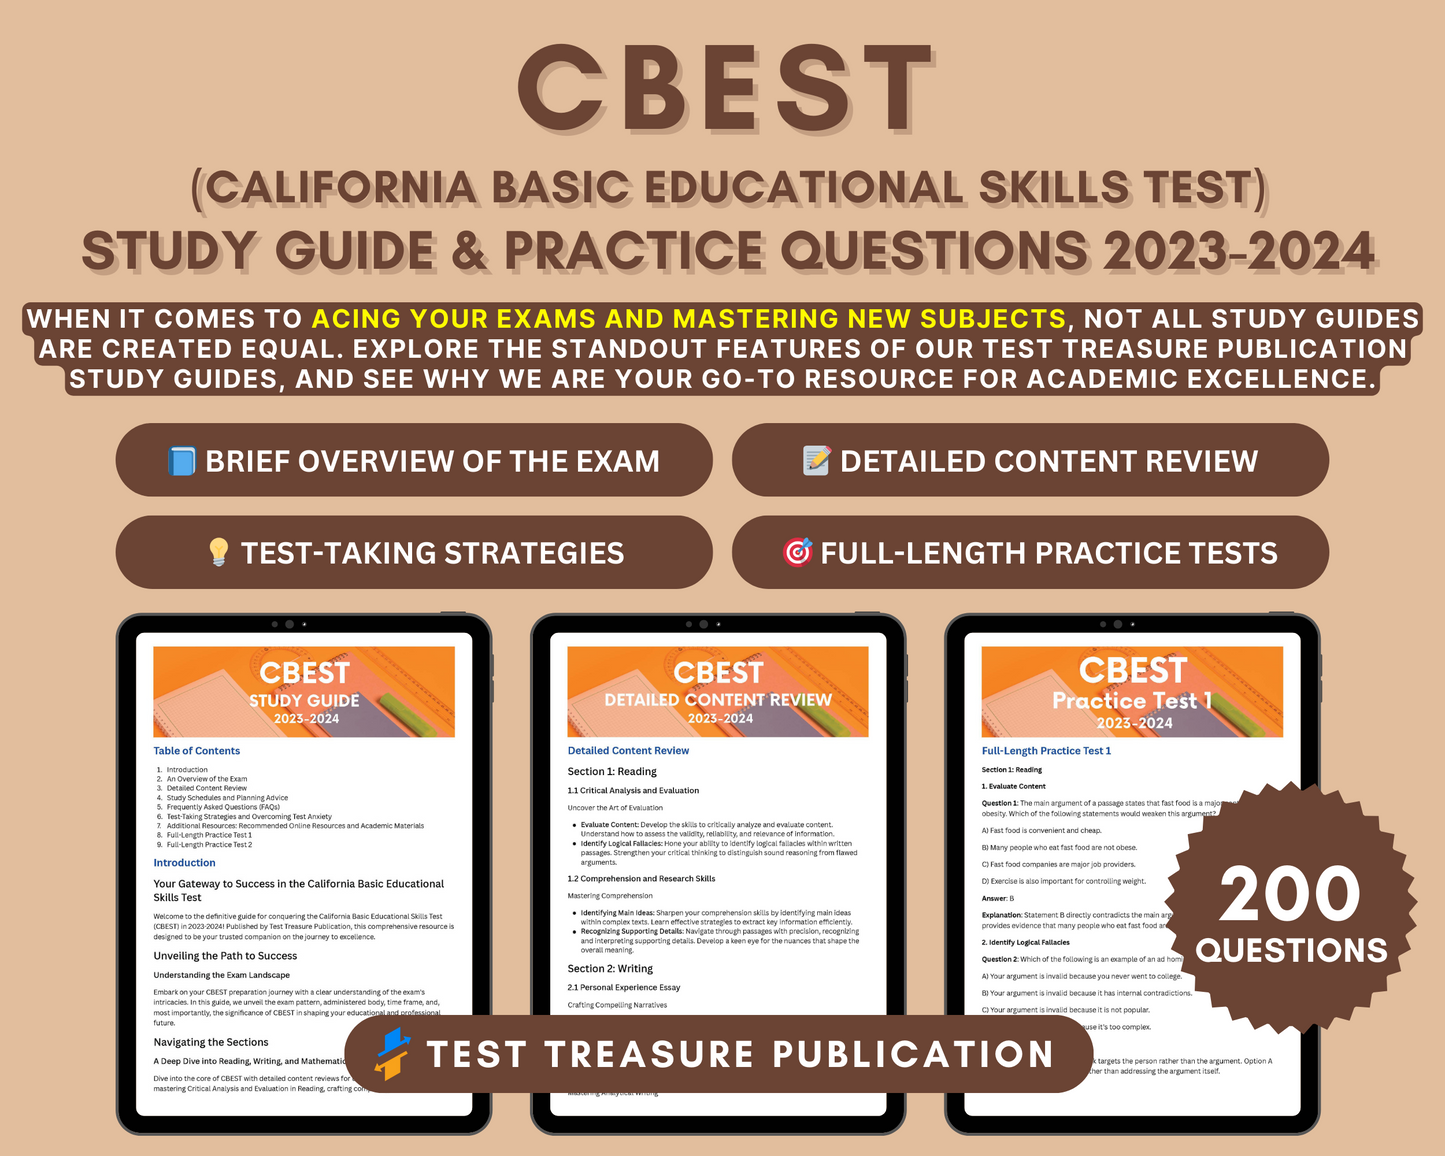 CBEST Prep Study Guide 2023-2024: In-Depth Content Review, and Practice Tests for California Teacher Credentialing Exam